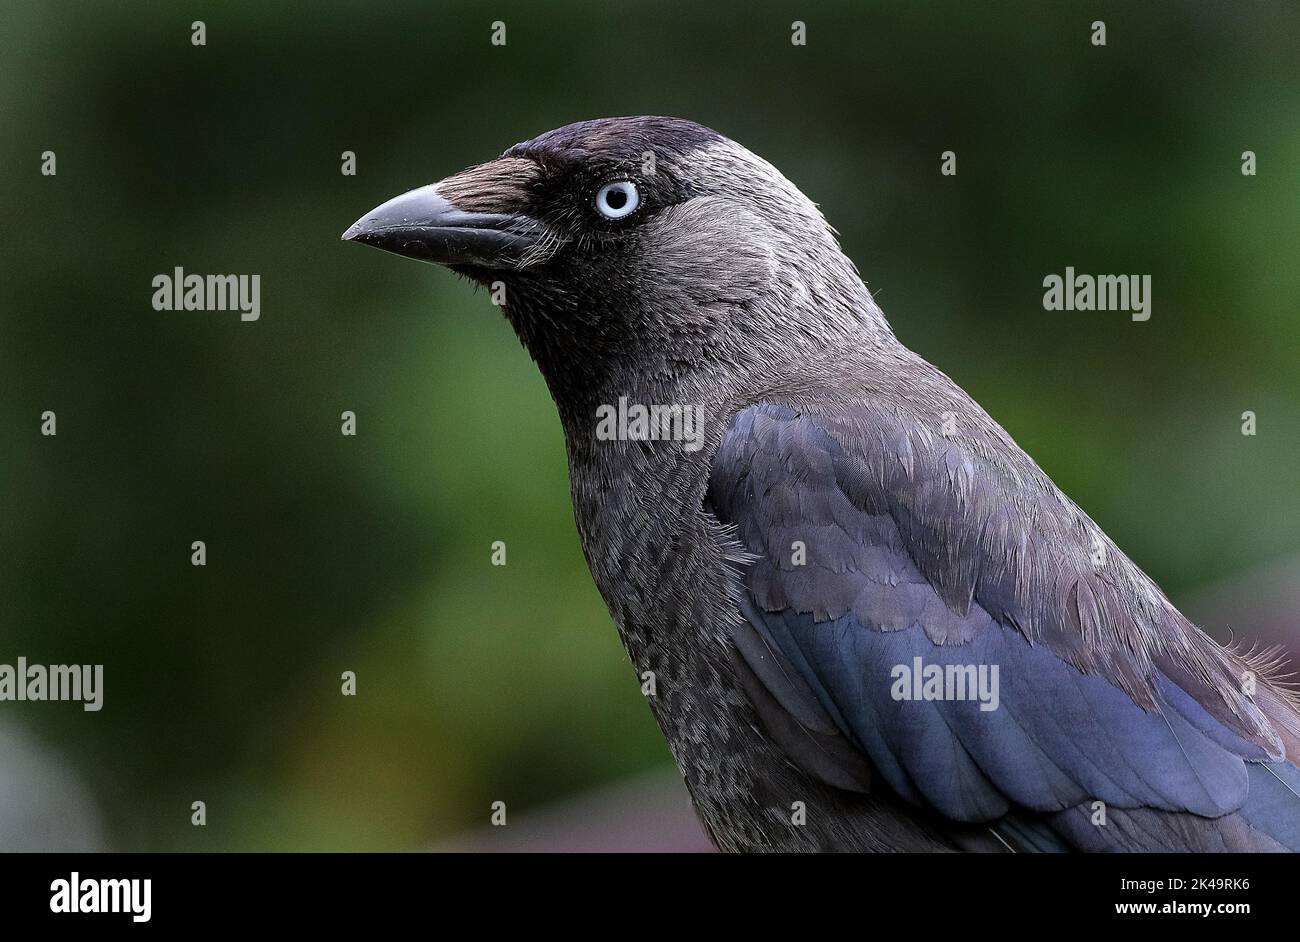 The western jackdaw, also known as the Eurasian jackdaw, the European jackdaw, or simply the jackdaw, is a passerine bird in the crow family. Stock Photo